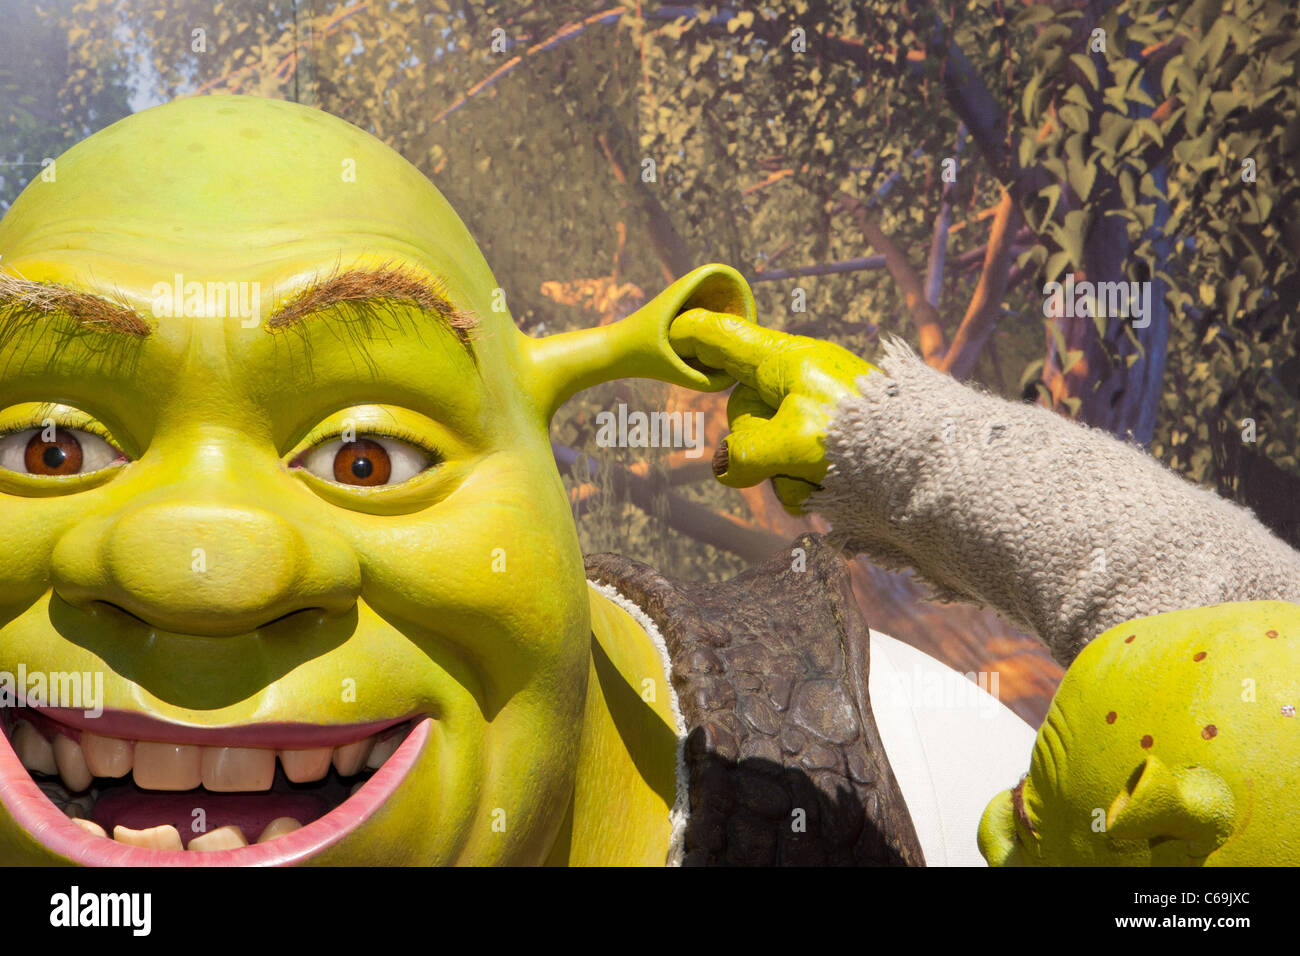 Eric Petersen in attendance for SHREK THE MUSICAL Star Visits Hollywood,  Madame Tussauds, Los Angeles, CA July 2, 2011. Photo By: Justin  Wagner/Everett Collection Stock Photo - Alamy